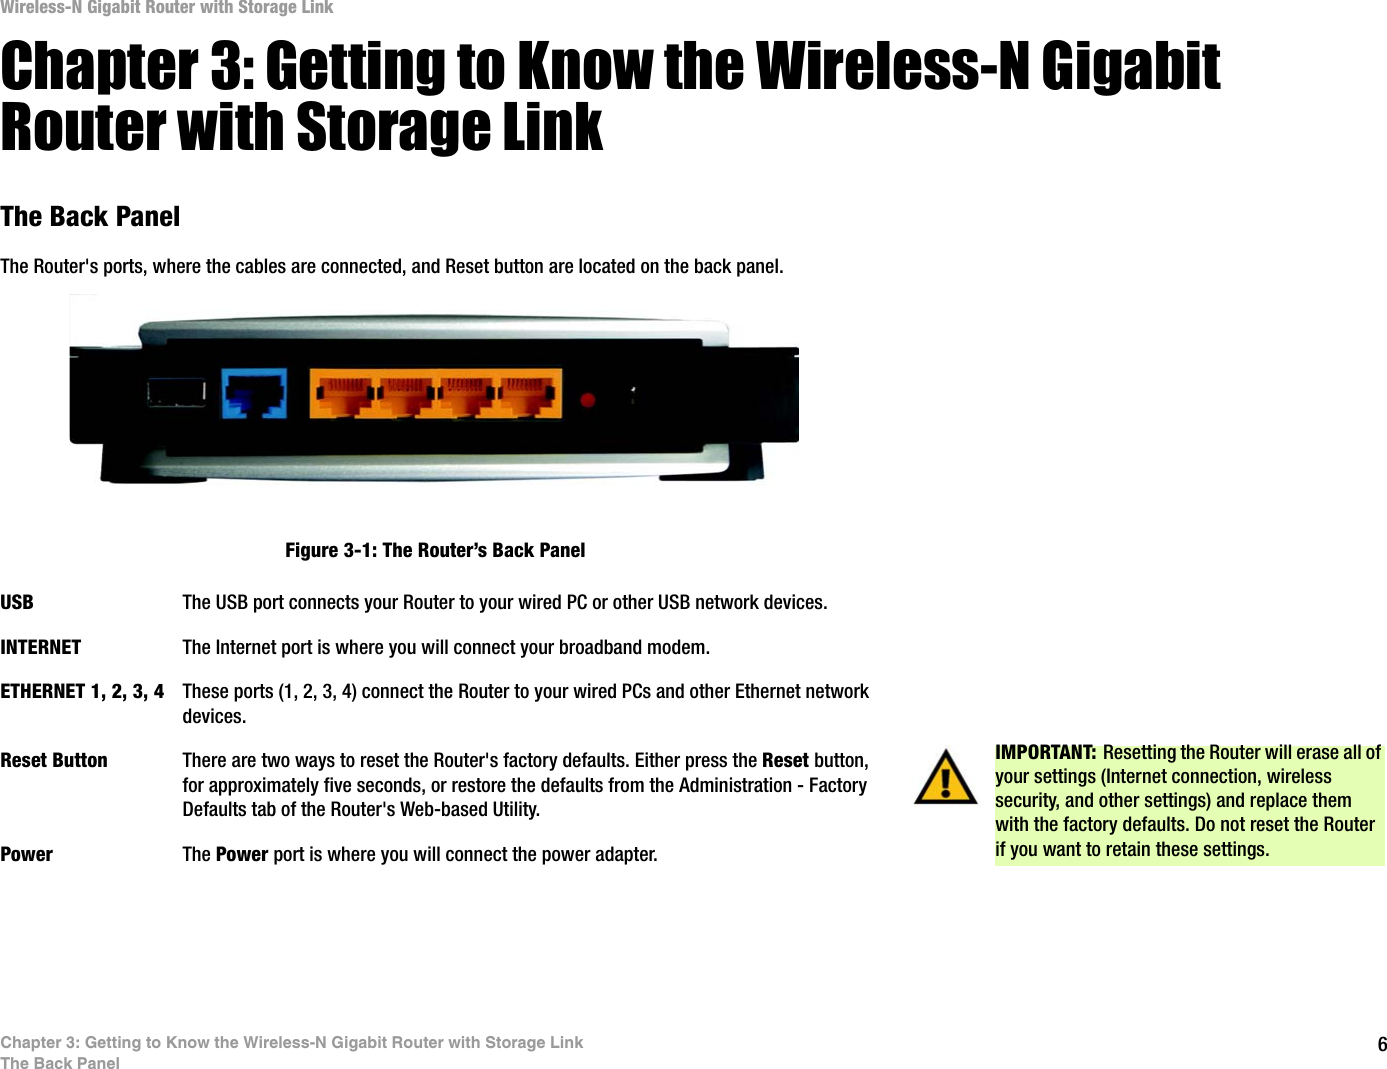 6Chapter 3: Getting to Know the Wireless-N Gigabit Router with Storage LinkThe Back PanelWireless-N Gigabit Router with Storage LinkChapter 3: Getting to Know the Wireless-N Gigabit Router with Storage LinkThe Back PanelThe Router&apos;s ports, where the cables are connected, and Reset button are located on the back panel.USB The USB port connects your Router to your wired PC or other USB network devices. INTERNET The Internet port is where you will connect your broadband modem.ETHERNET 1, 2, 3, 4 These ports (1, 2, 3, 4) connect the Router to your wired PCs and other Ethernet network devices.Reset Button There are two ways to reset the Router&apos;s factory defaults. Either press the Reset button,for approximately five seconds, or restore the defaults from the Administration - Factory Defaults tab of the Router&apos;s Web-based Utility.Power The Power port is where you will connect the power adapter.IMPORTANT: Resetting the Router will erase all of your settings (Internet connection, wireless security, and other settings) and replace them with the factory defaults. Do not reset the Router if you want to retain these settings.Figure 3-1: The Router’s Back Panel